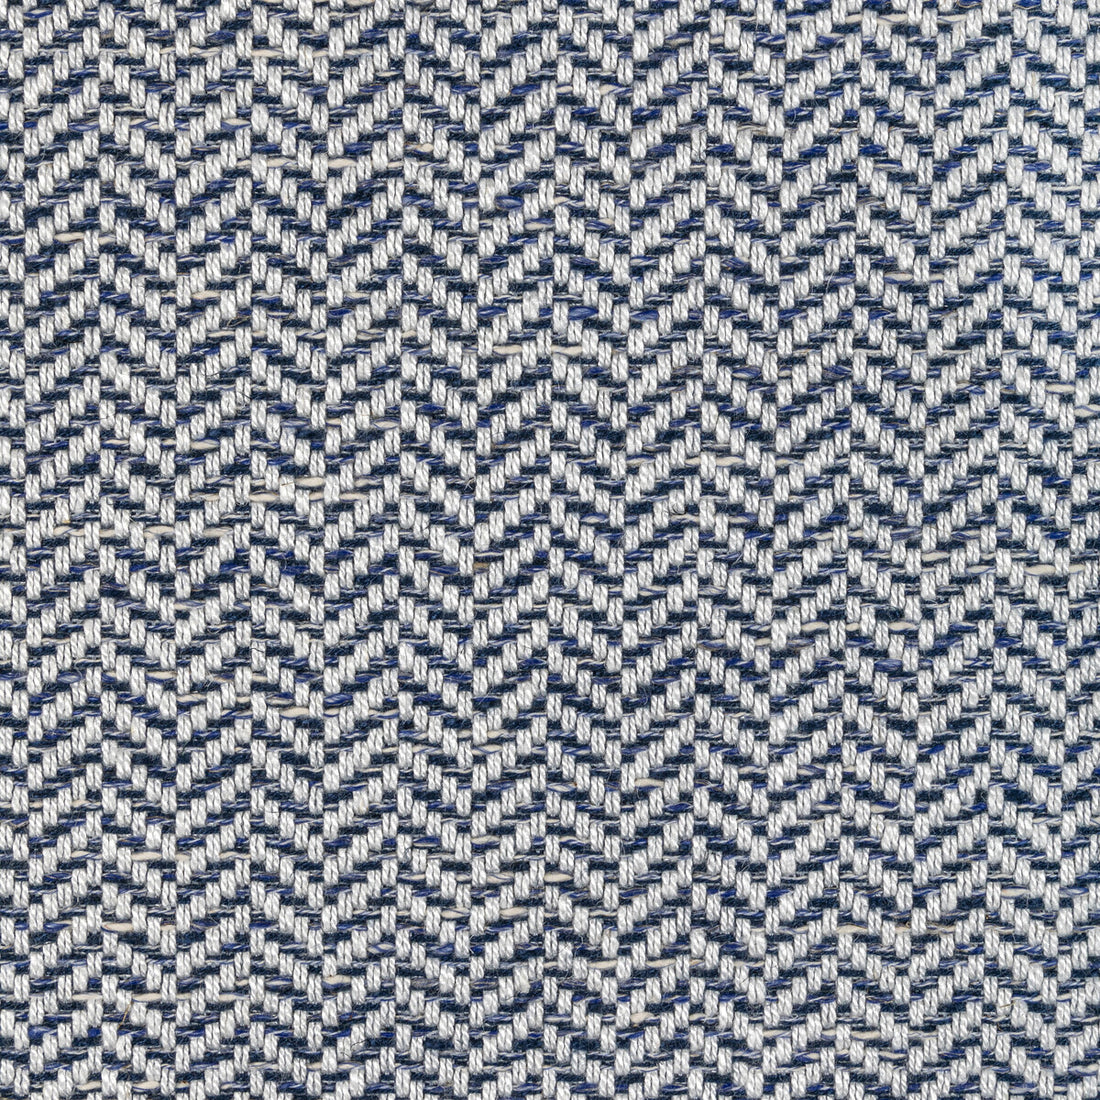 Verve Weave fabric in ink color - pattern 36358.51.0 - by Kravet Couture in the Corey Damen Jenkins Trad Nouveau collection